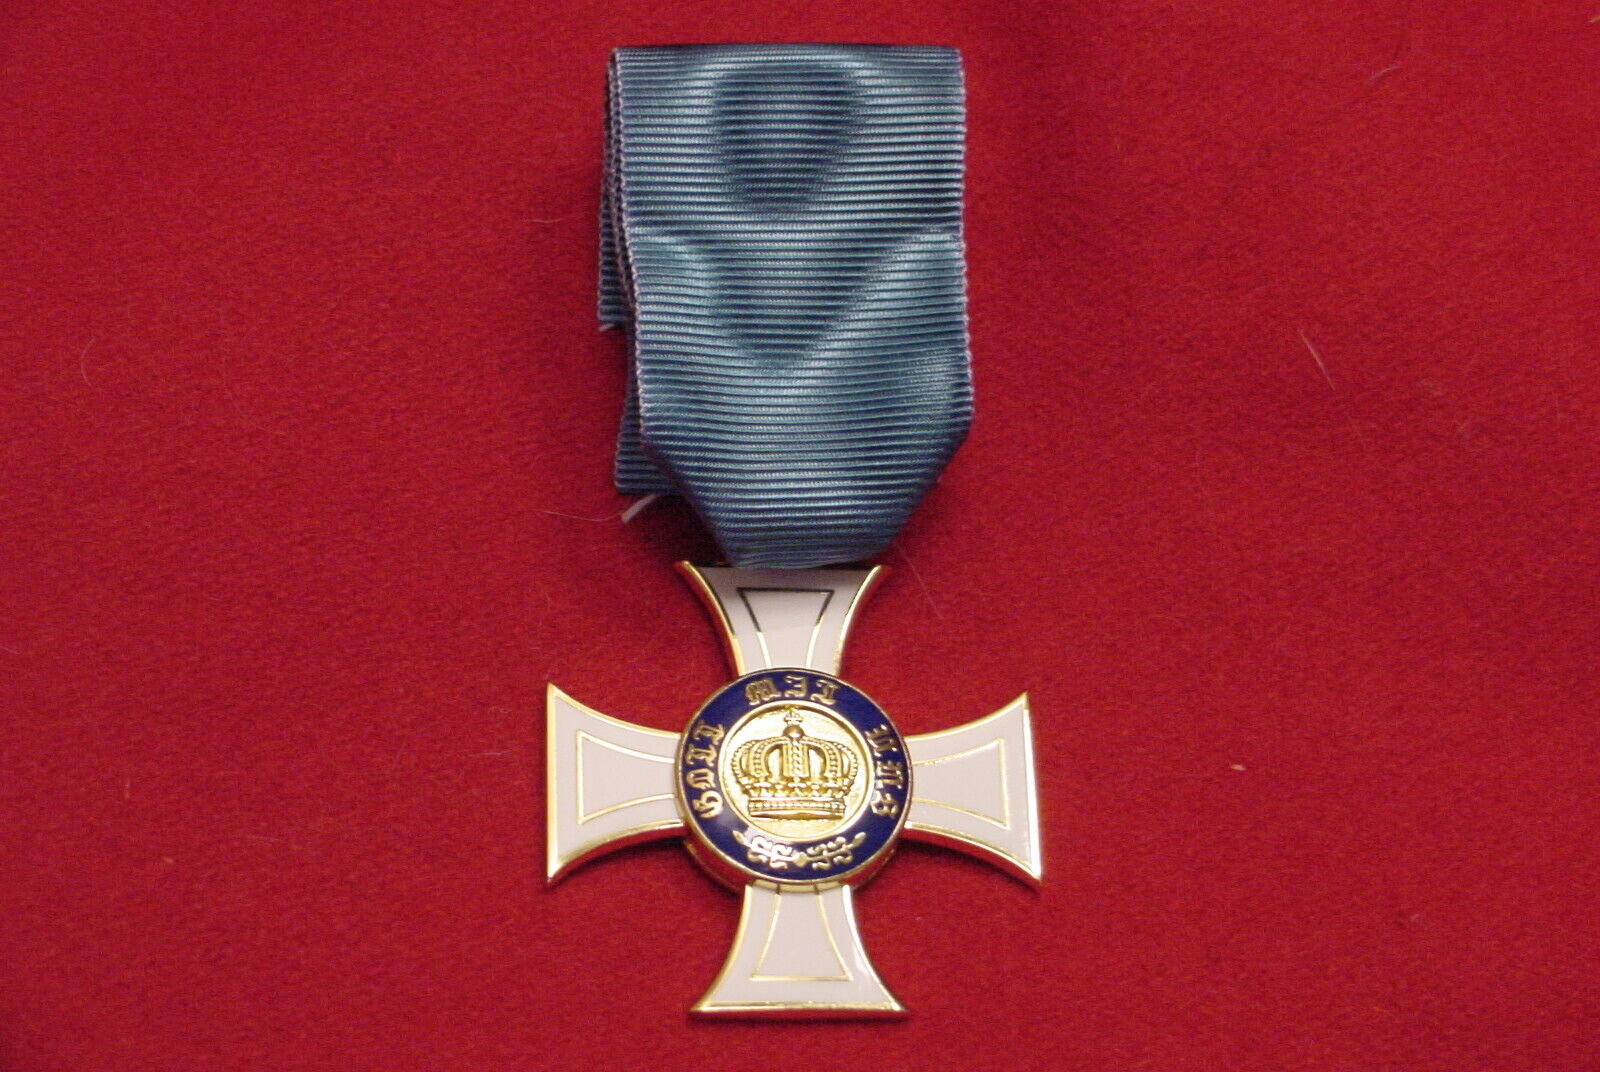 PRUSSIA  GERMAN EMPIRE WWI MEDAL ORDER OF THE CROWN 3rd CLASS - PEACETIME